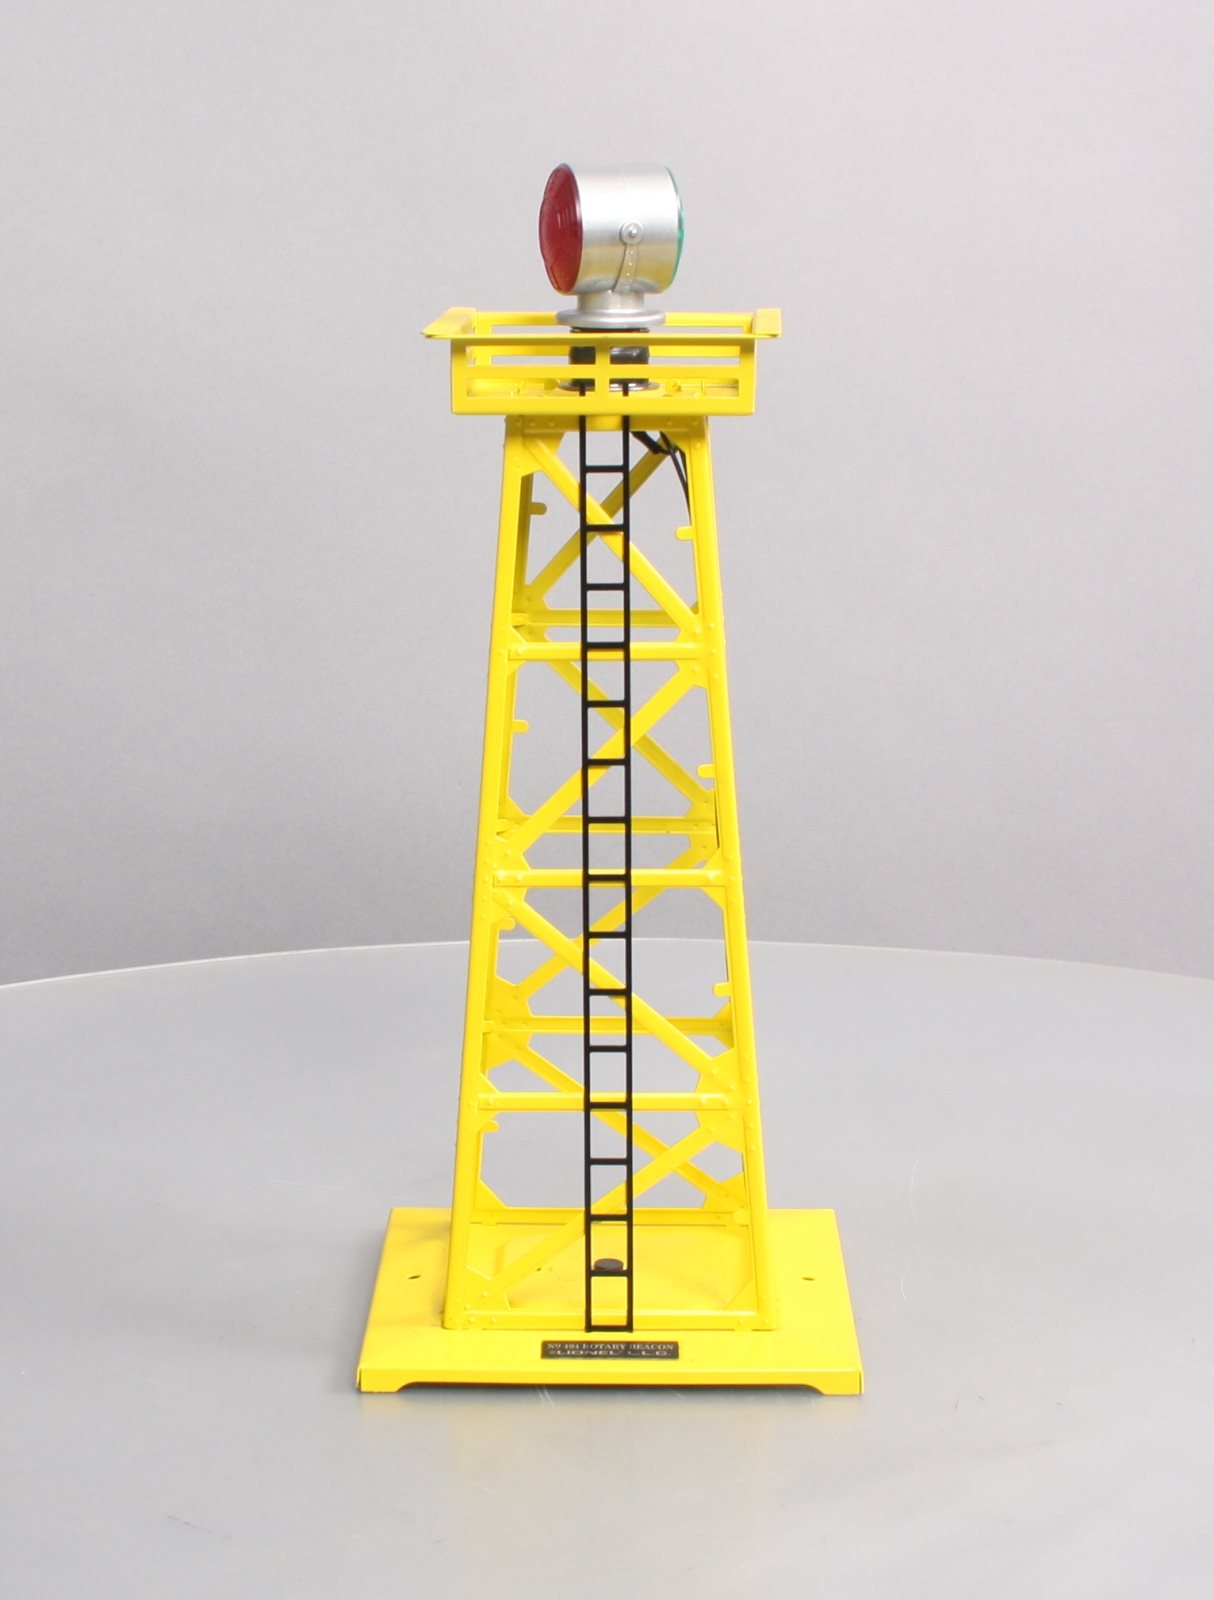 Lionel 6-81944 Yellow #494 Rotary Airport Beacon Tower